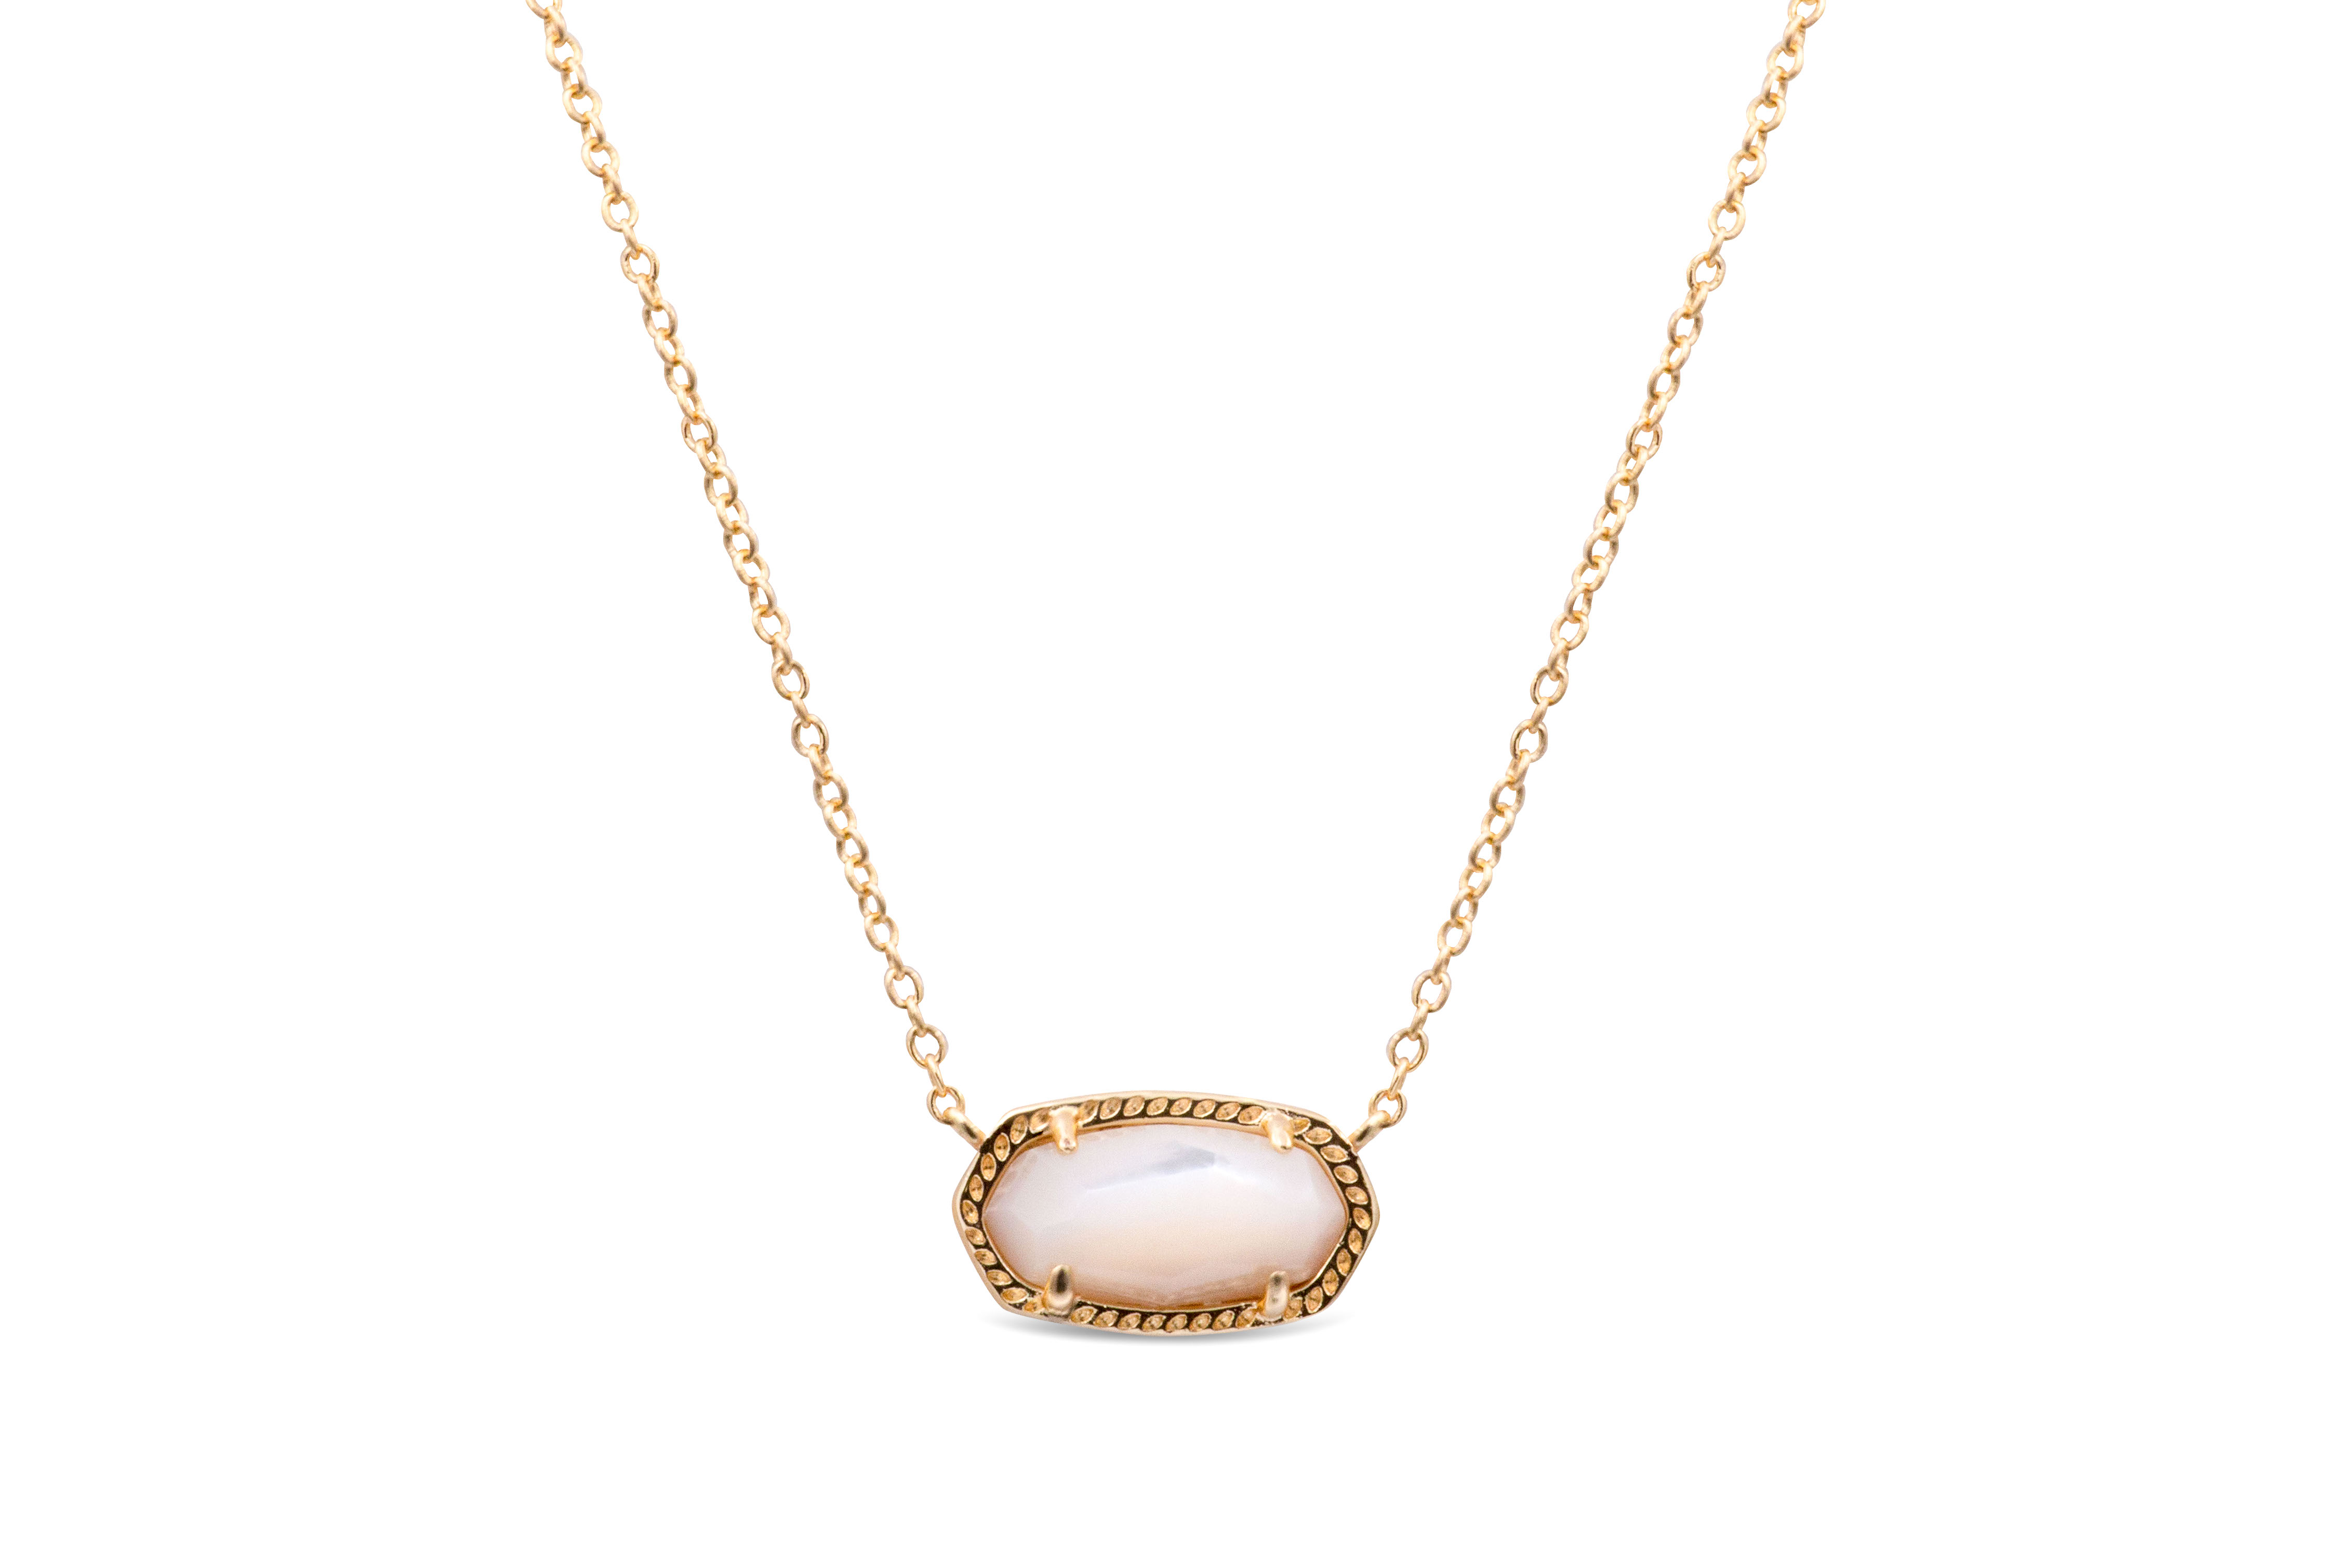 Kendra Scott Pearl Beaded Elisa Gold Pendant Necklace in Ivory Mother-of-Pearl